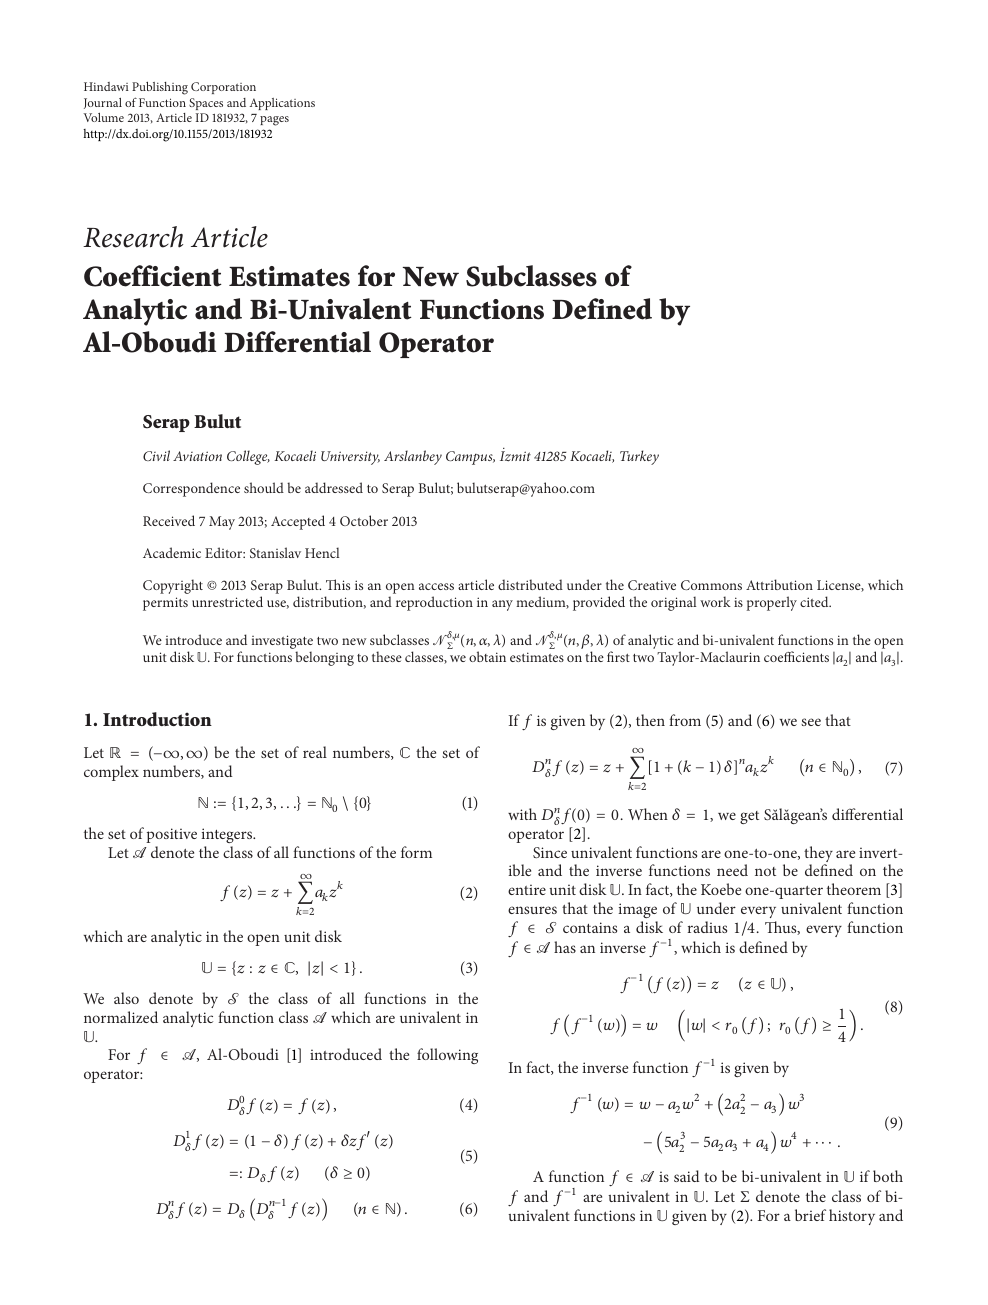 Coefficient Estimates For New Subclasses Of Analytic And Bi Univalent Functions Defined By Al Oboudi Differential Operator Topic Of Research Paper In Mathematics Download Scholarly Article Pdf And Read For Free On Cyberleninka